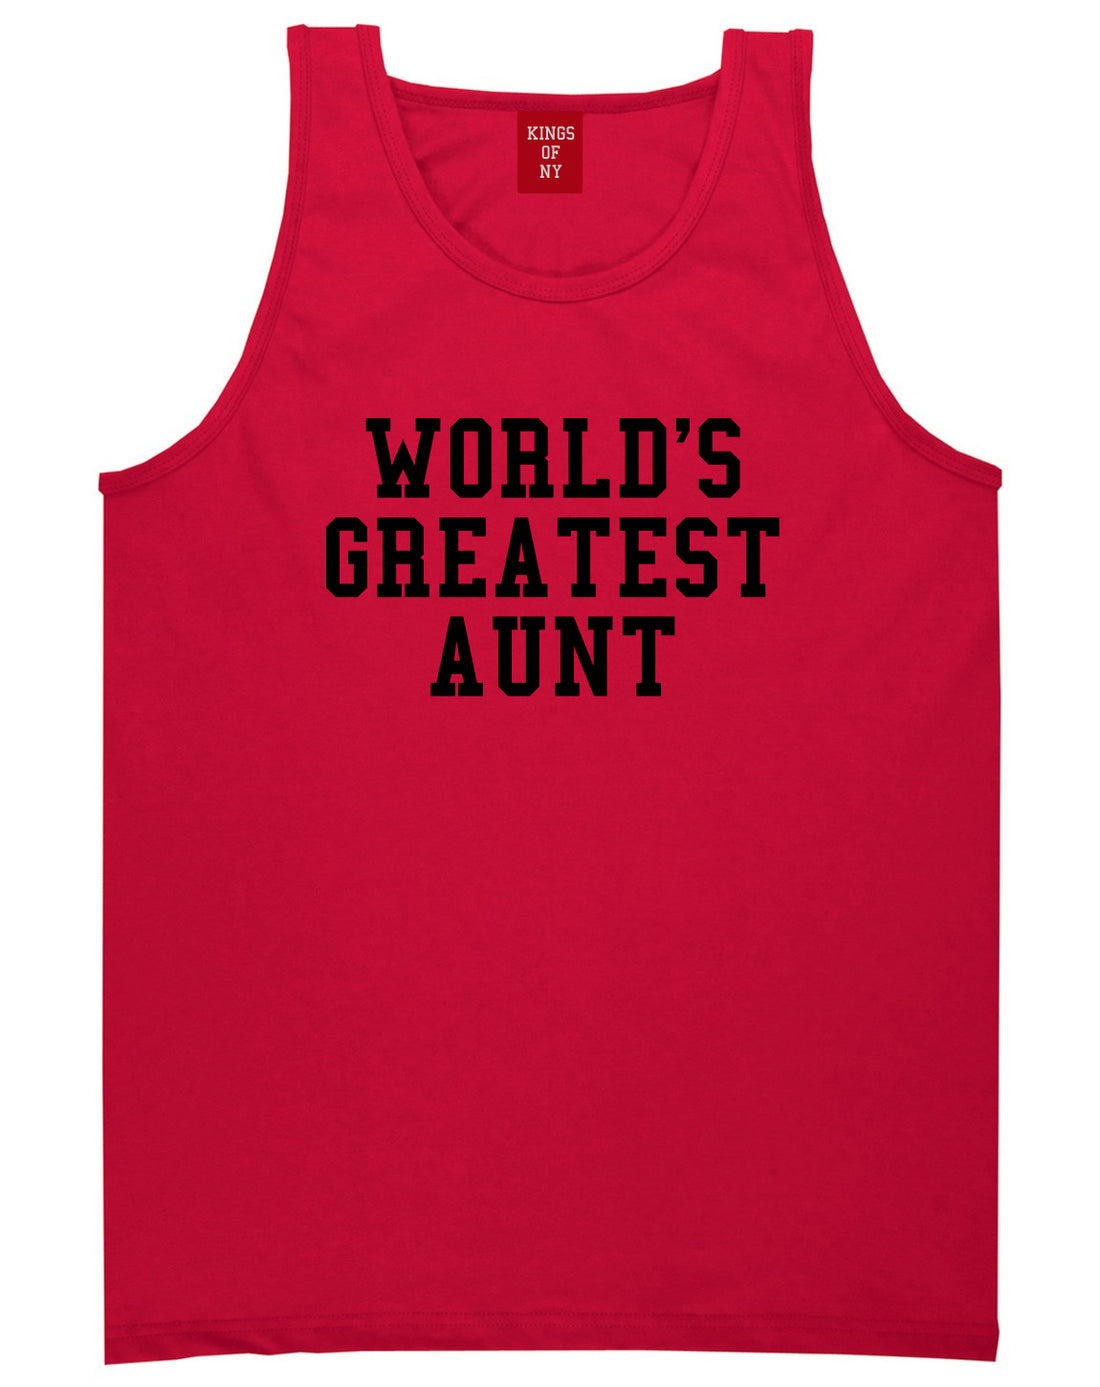 Worlds Greatest Aunt Auntie Birthday Gift Mens Tank Top T-Shirt Red